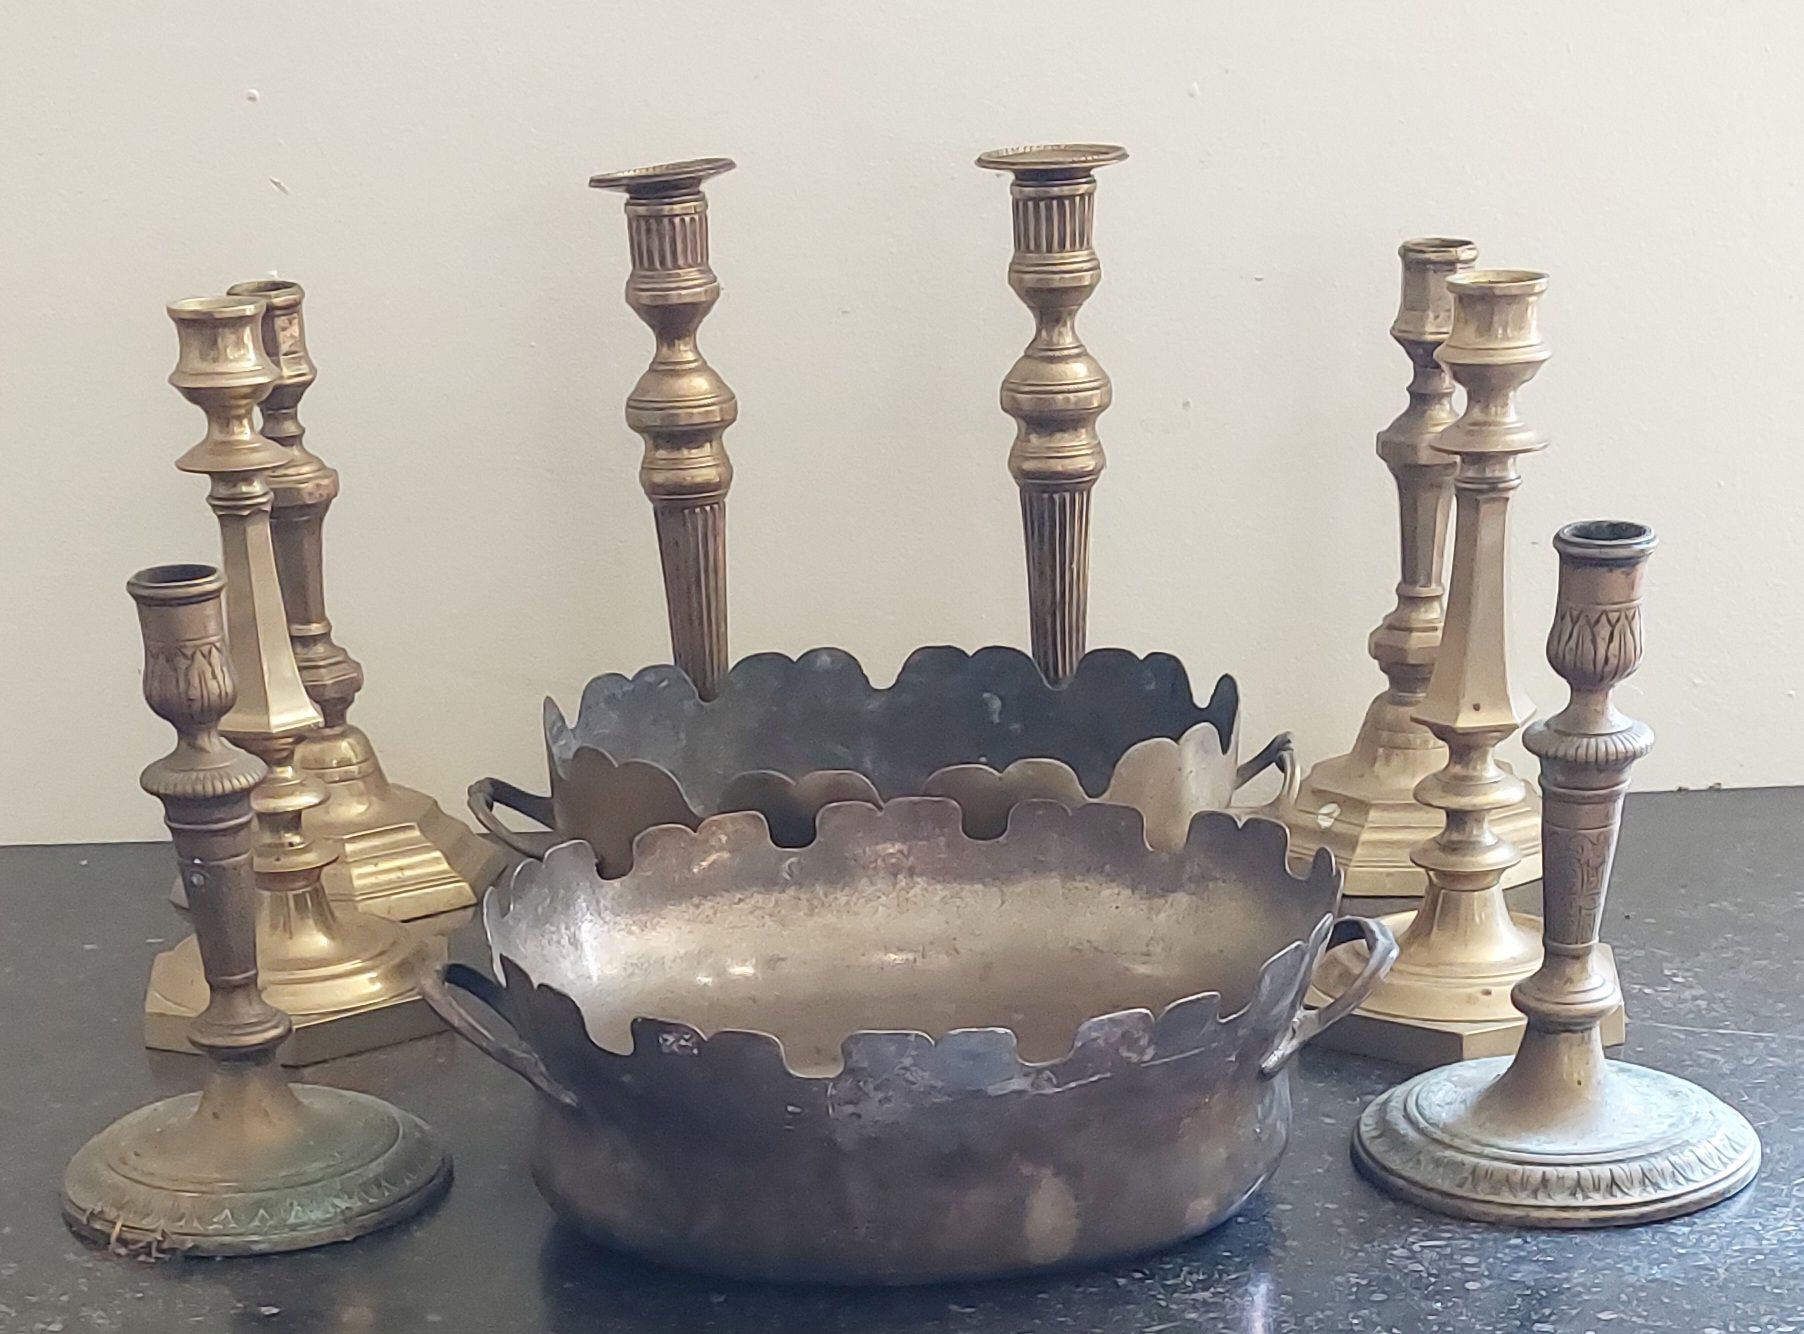 Null LOT including : 

- 4 pairs of bronze candlesticks (3 pairs missing)

- 2 m&hellip;